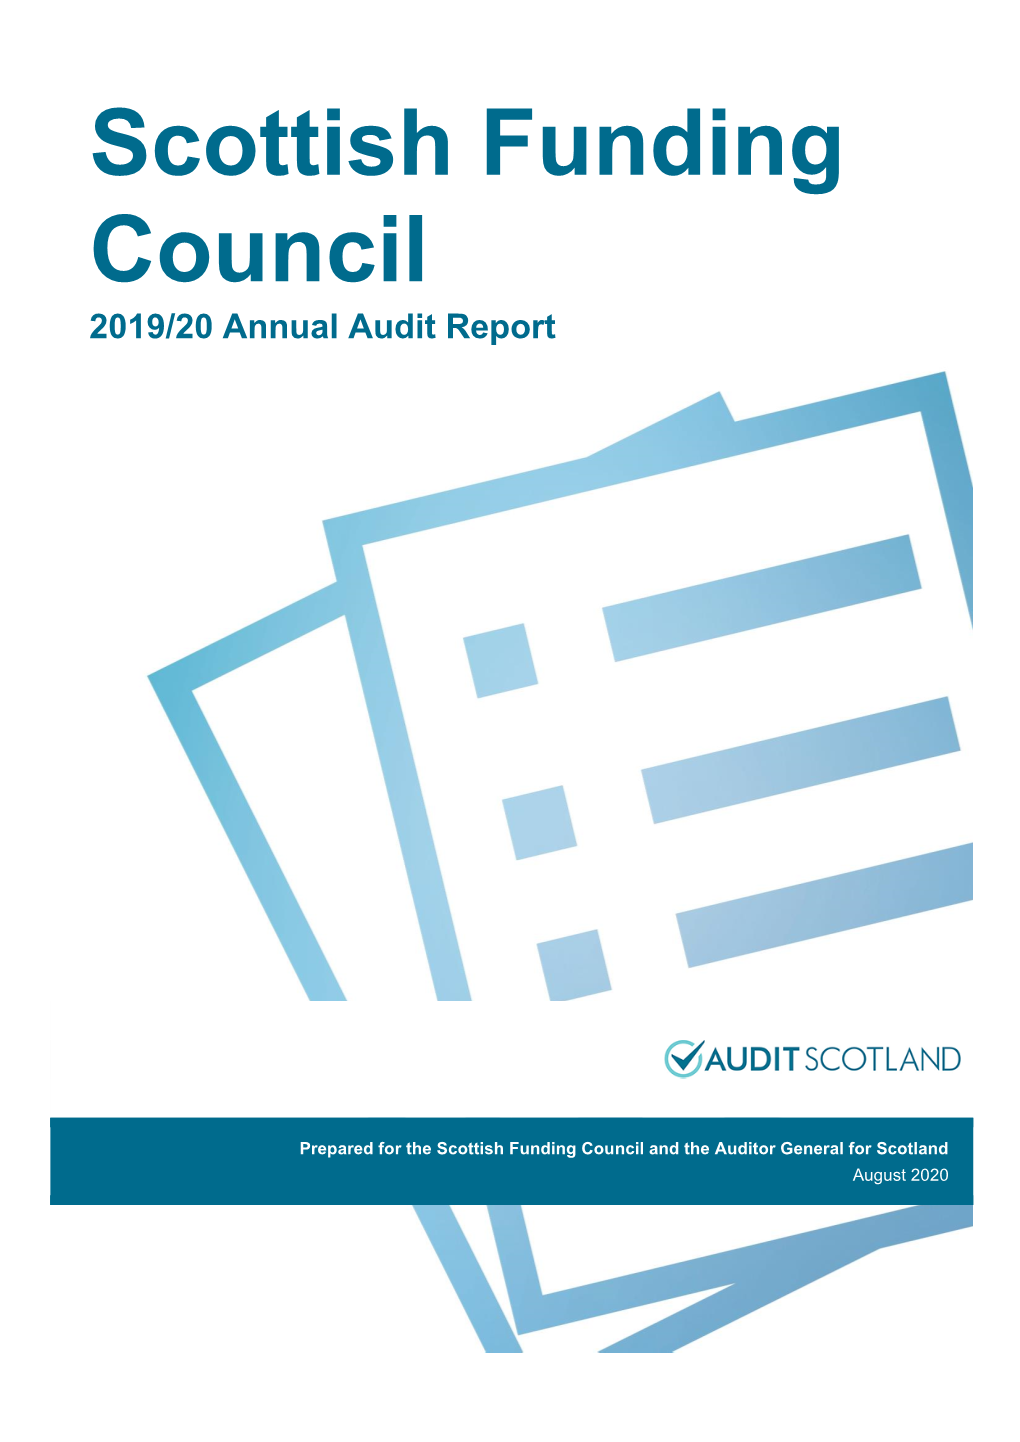 Scottish Funding Council 2019/20 Annual Audit Report